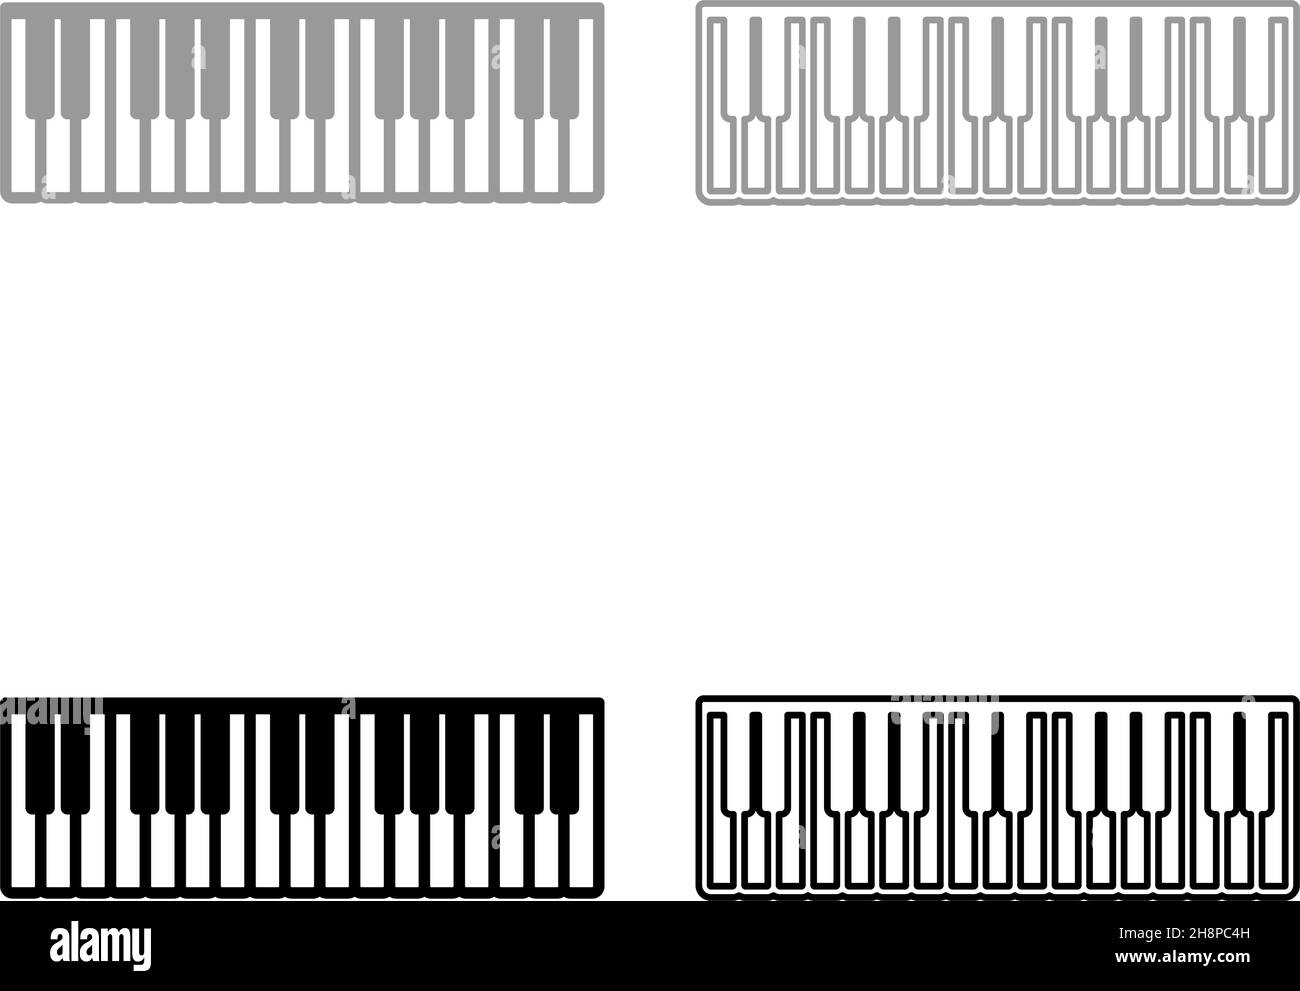 Pianino music keys ivory synthesizer set icon grey black color vector illustration image simple flat style solid fill outline contour line thin Stock Vector